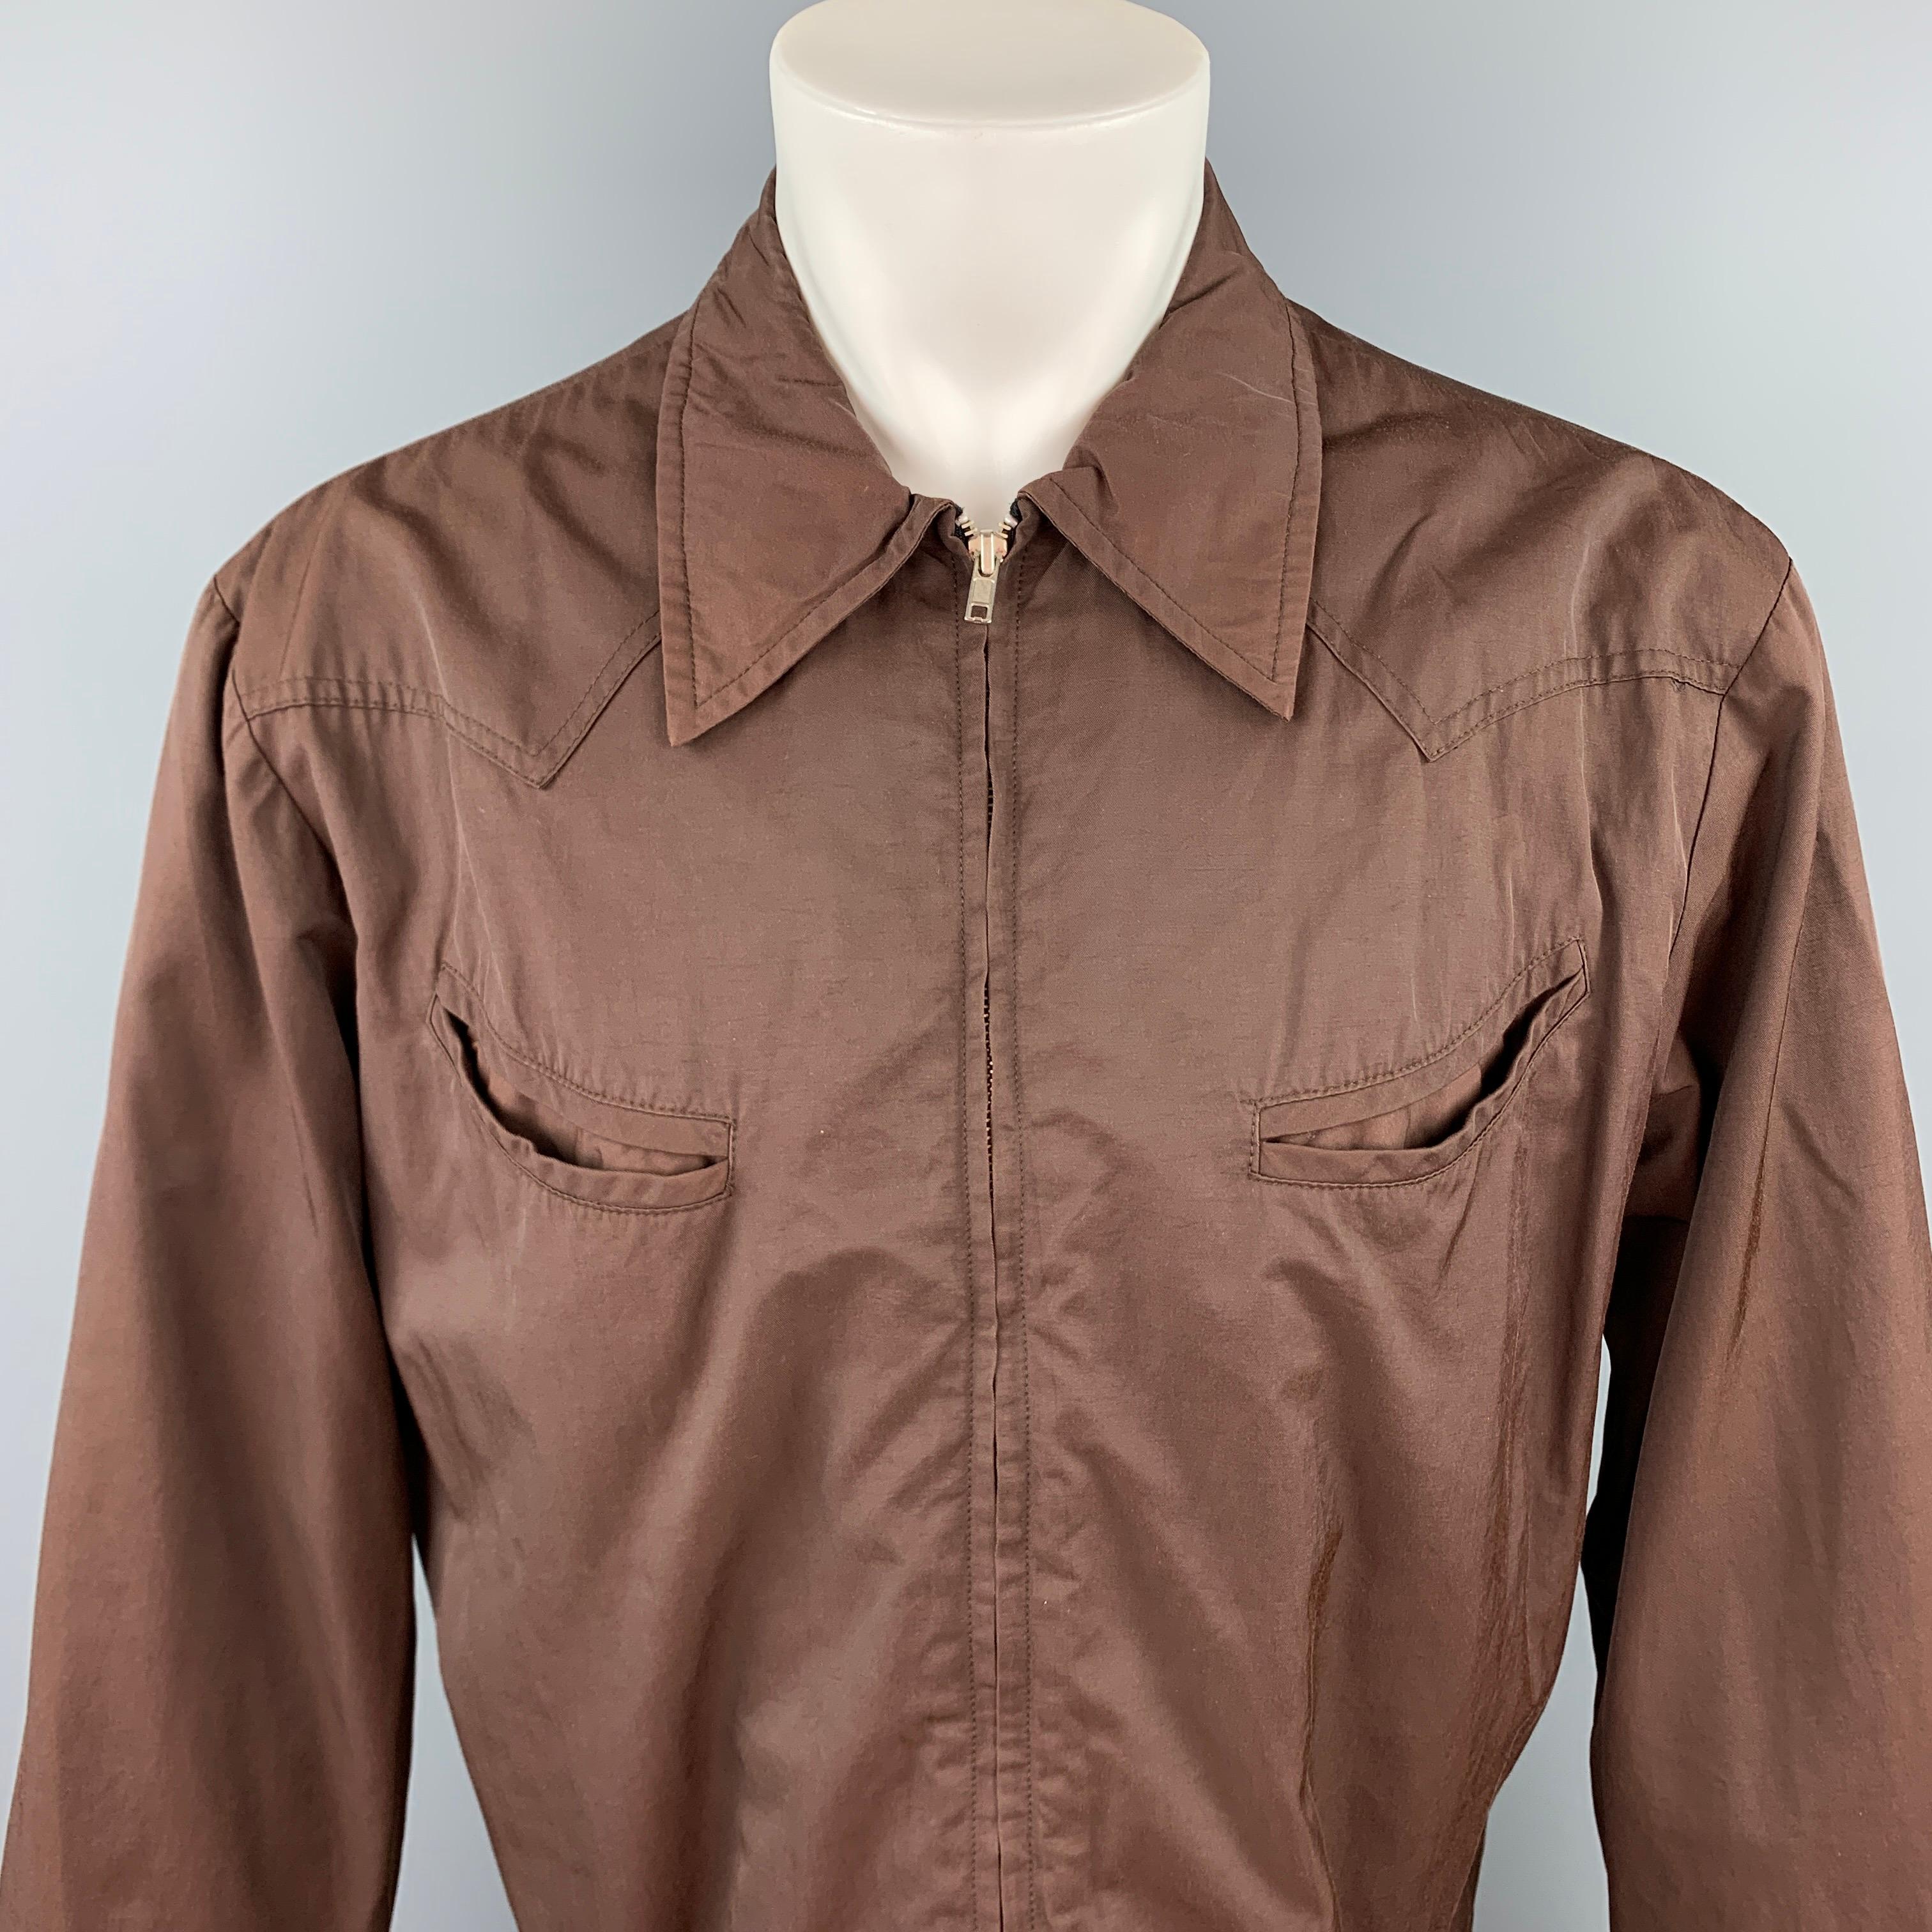 JOHN BARTLETT jacket comes in a brown cotton / nylon featuring a pointed collar, slit pockets, and a zip up closure. Made in USA.

Very Good Pre-Owned Condition.
Marked: 4

Measurements:

Shoulder: 20 in.
Chest: 48 in.
Sleeve: 26 in.
Length: 23.5